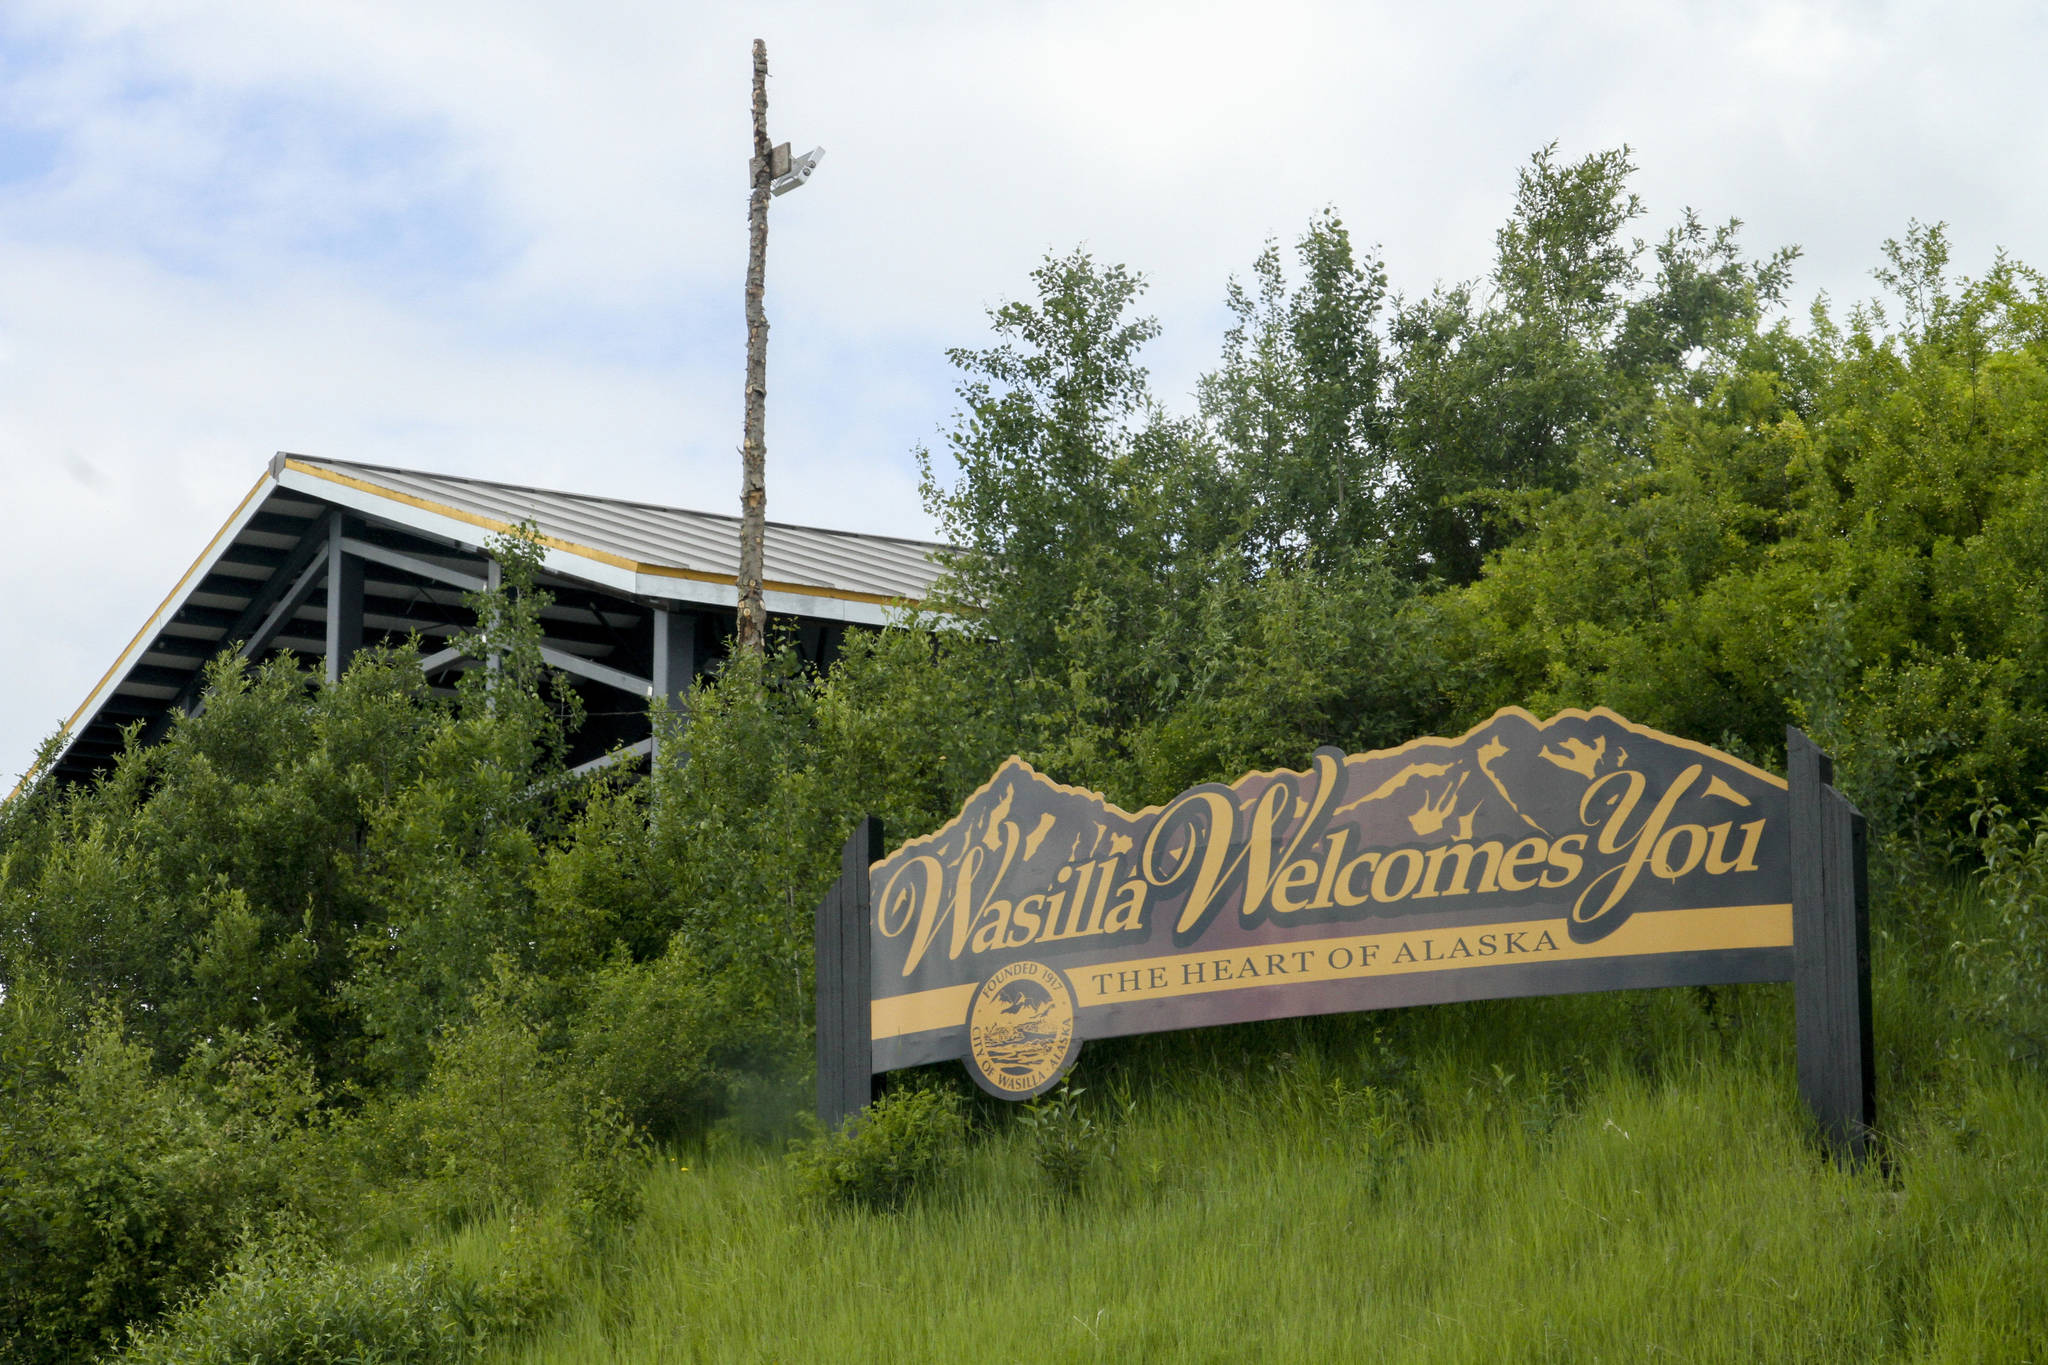 This June 14, 2019, photo shows a Wasilla sign on the outskirts of Wasilla, Alaska. Alaska Gov. Mike Dunleavy has called lawmakers into special session in Wasilla beginning July 8, but some lawmakers have expressed concerns over security and logistics with the location more than 500 miles from the state capital of Juneau, Alaska. (AP Photo/Mark Thiessen)